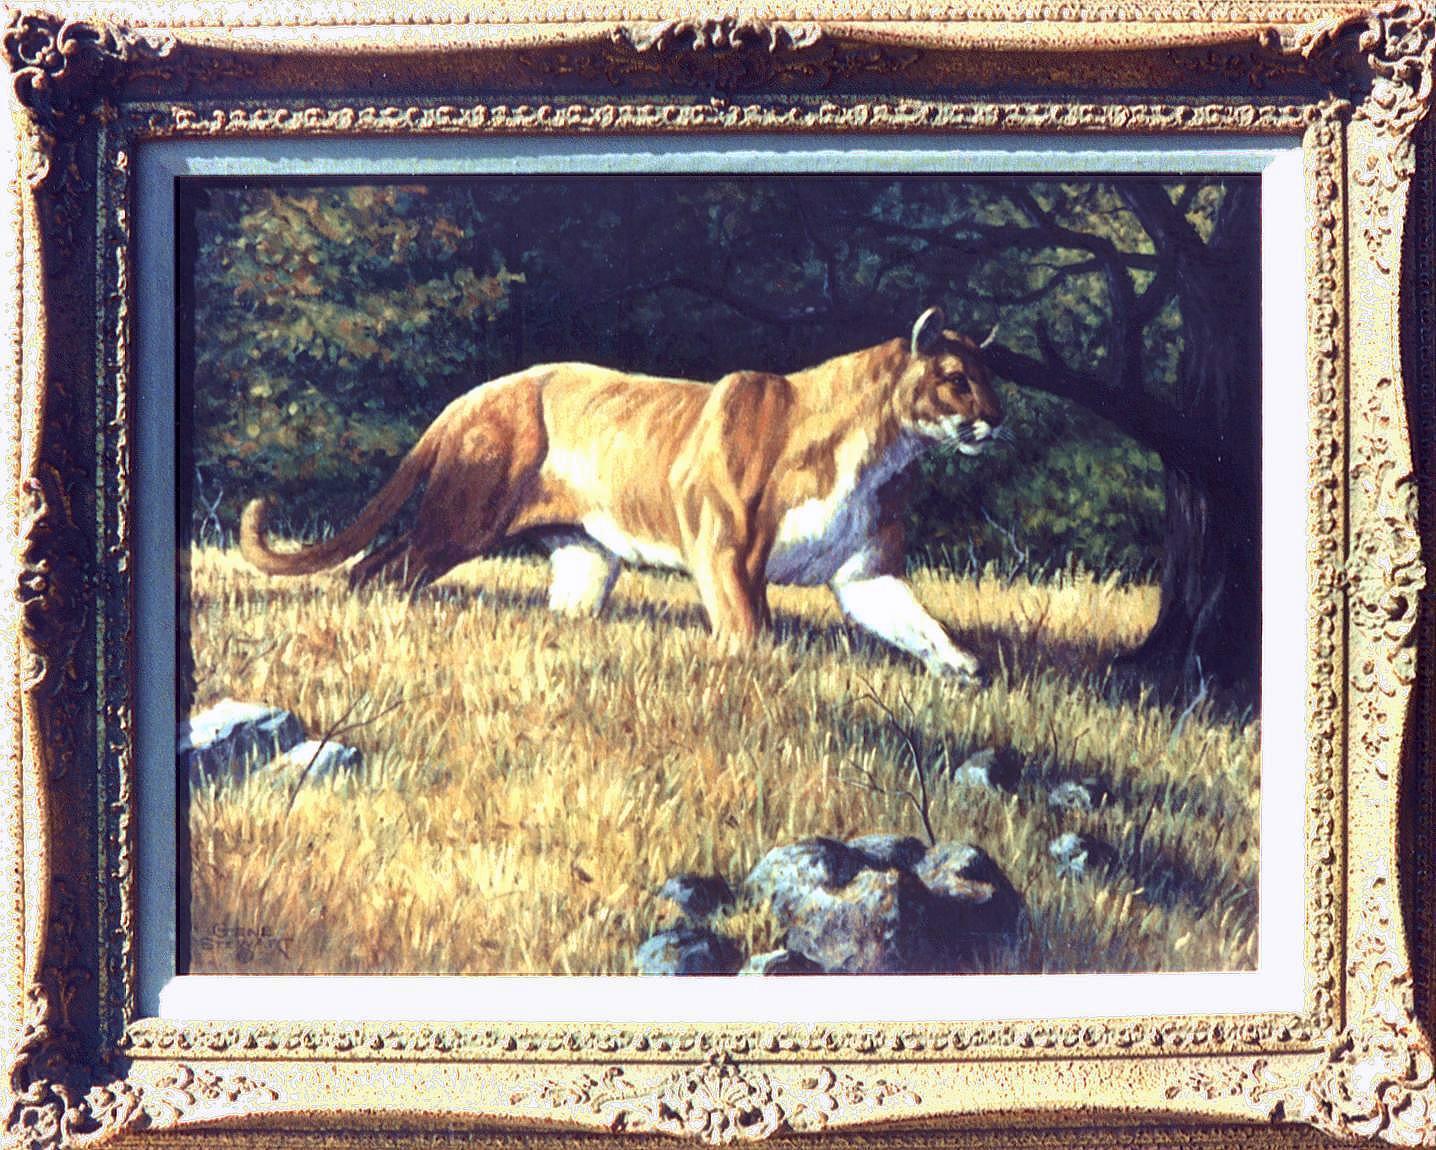 "On The Prowl", oil painting